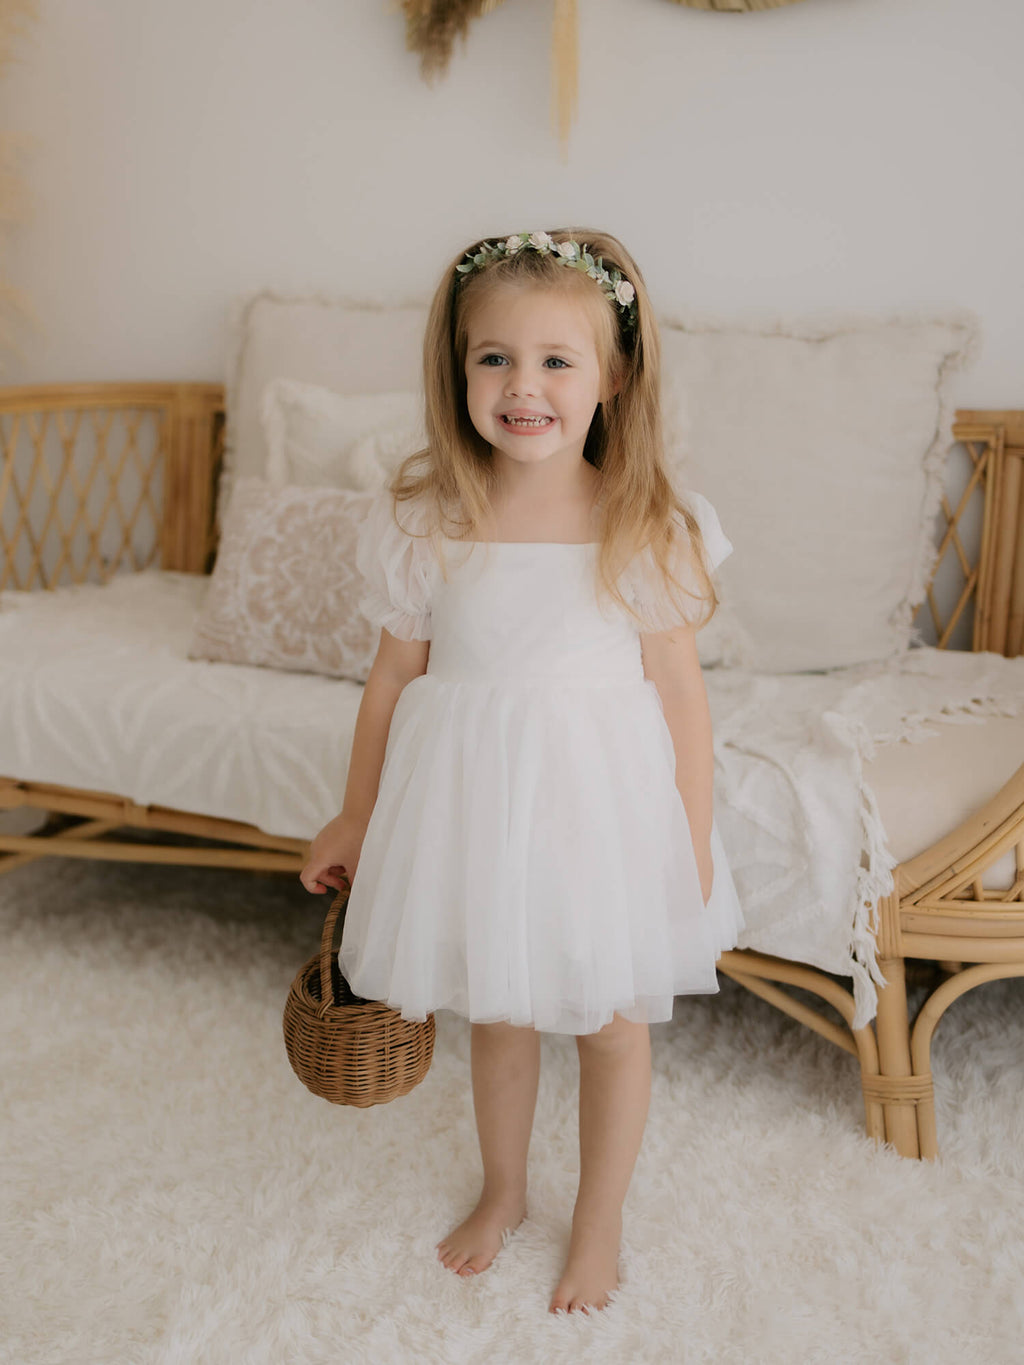 Layla flower girl dress in ivory is worn by a young girl. She stands holding a basket and smiling. She also wears our Eden flower crown hair wreath.